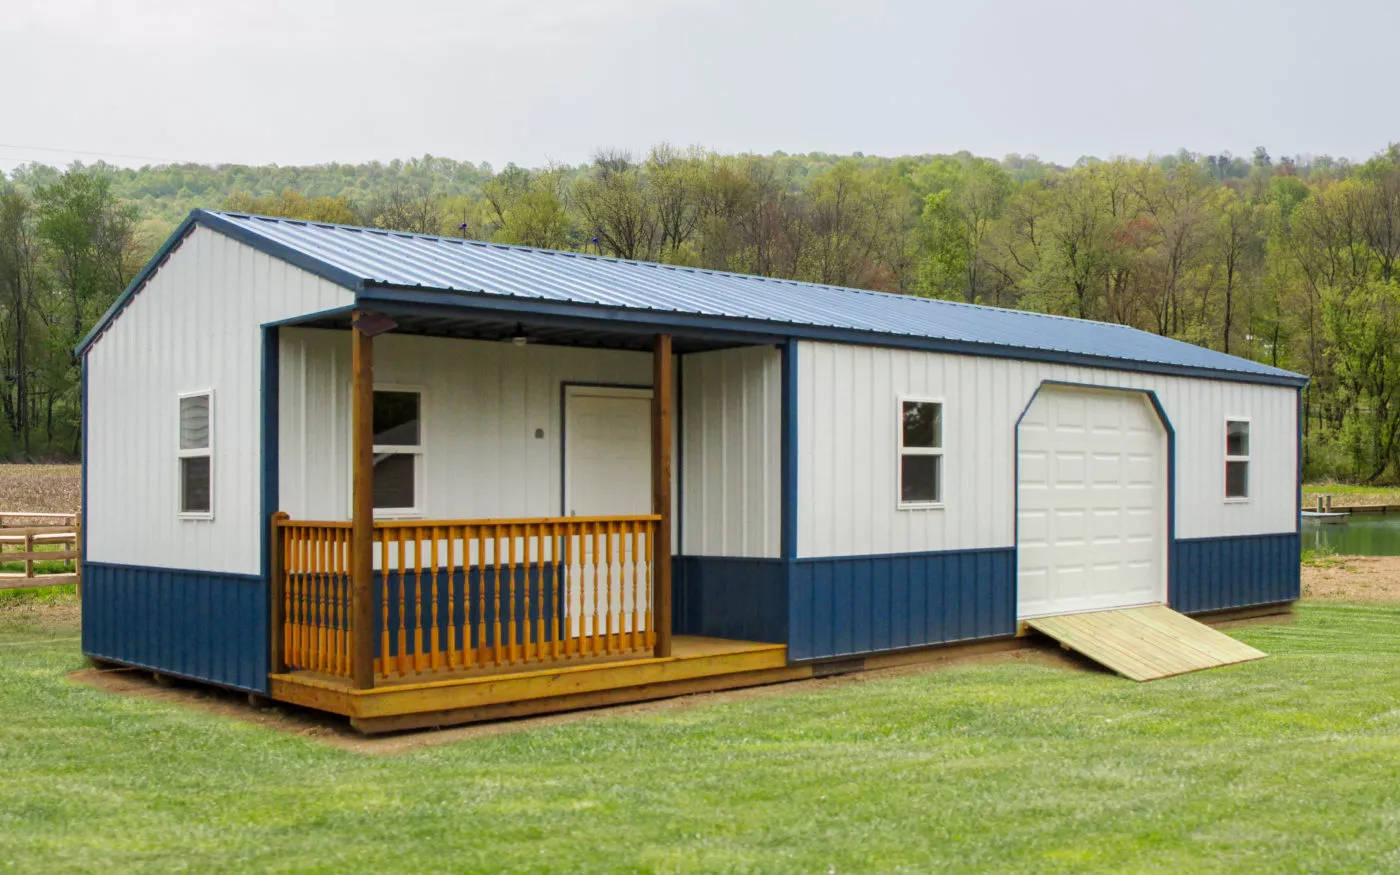 Bayfront Lofted Cabins For Sale In Sears, Michigan